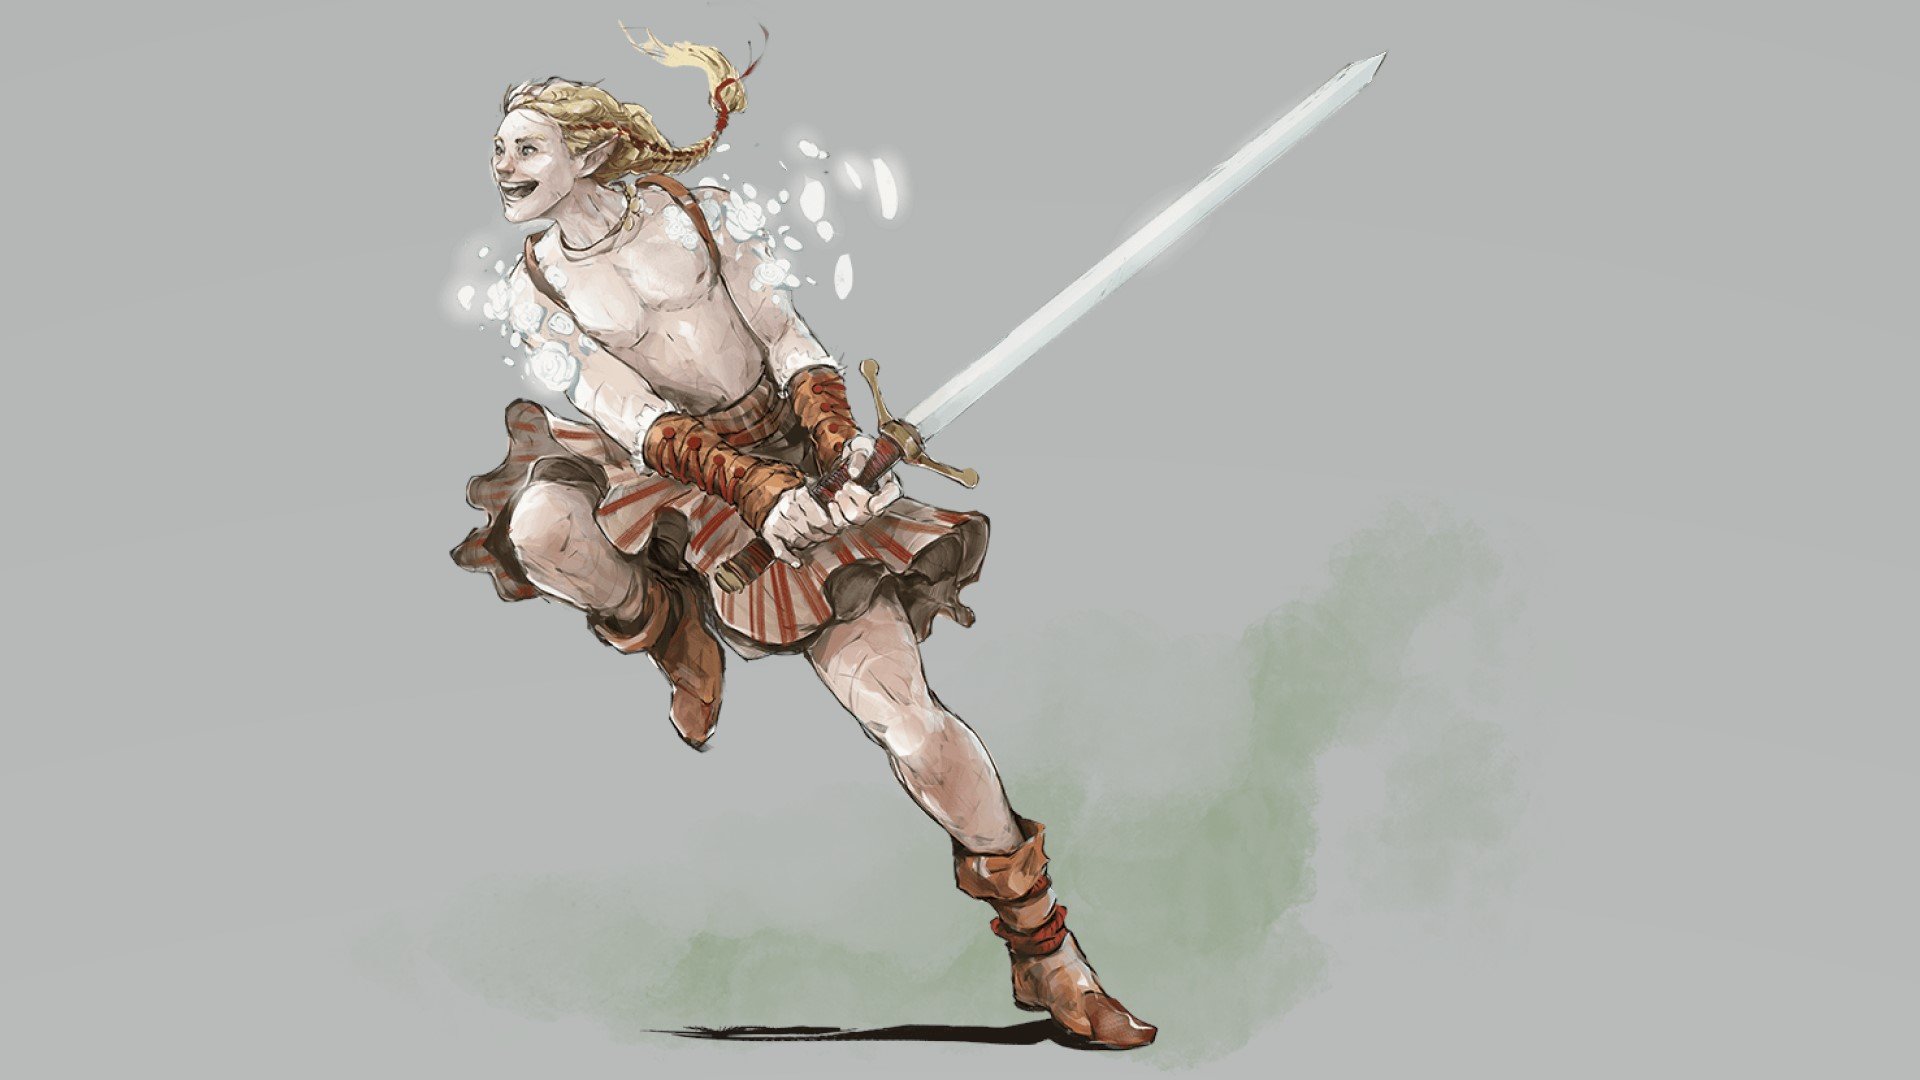 DnD Barbarian 5E class guide - Wizards of the Coast artwork showing an elf barbarian with a greatsword